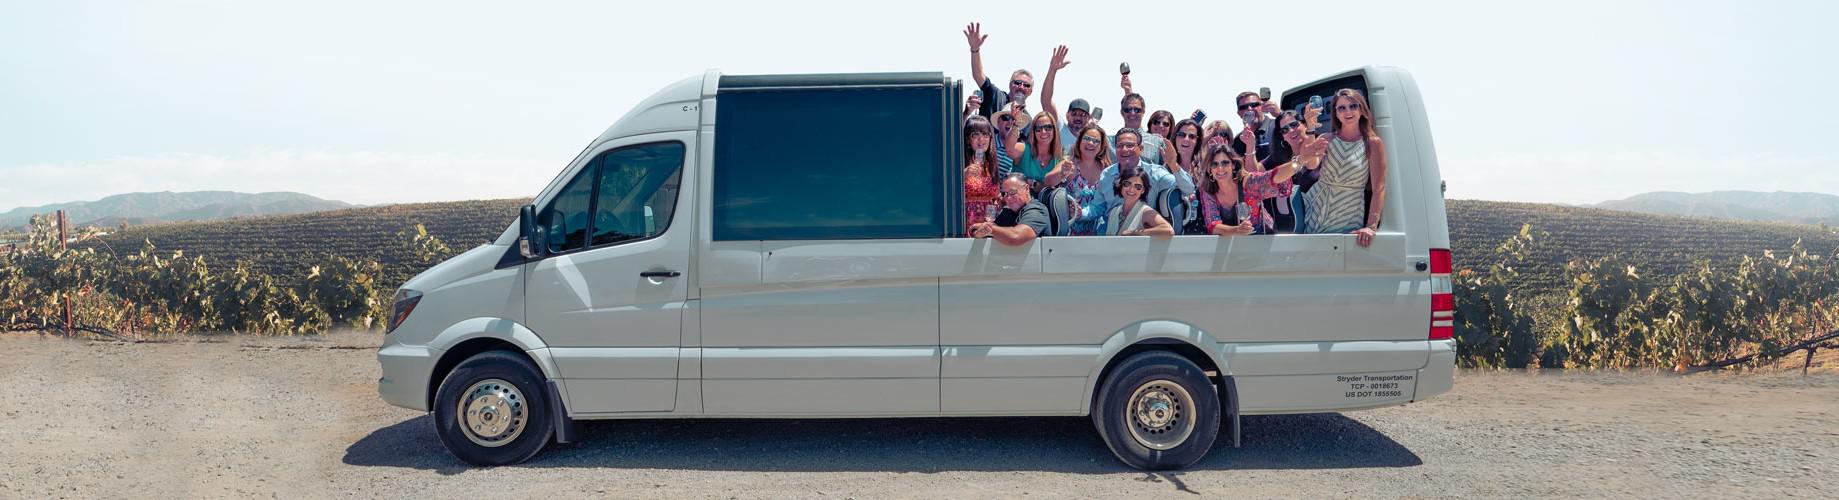 Guests pose for a photo with hands raised inside a convertible shuttle